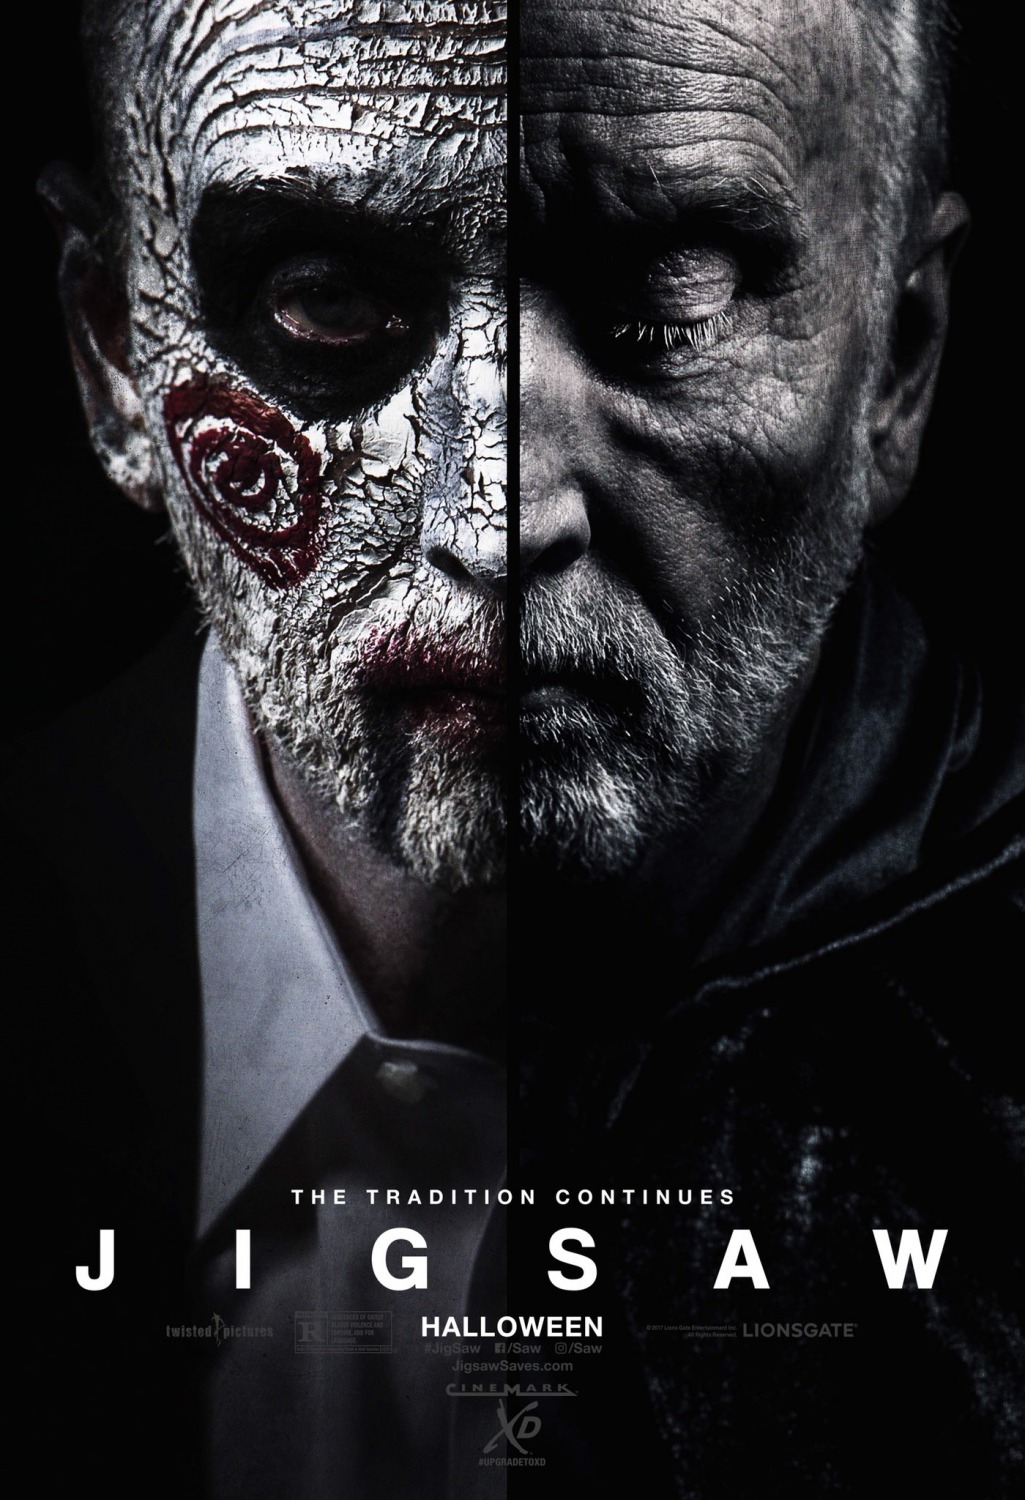 Jigsaw 2017 Movie Poster Wallpapers